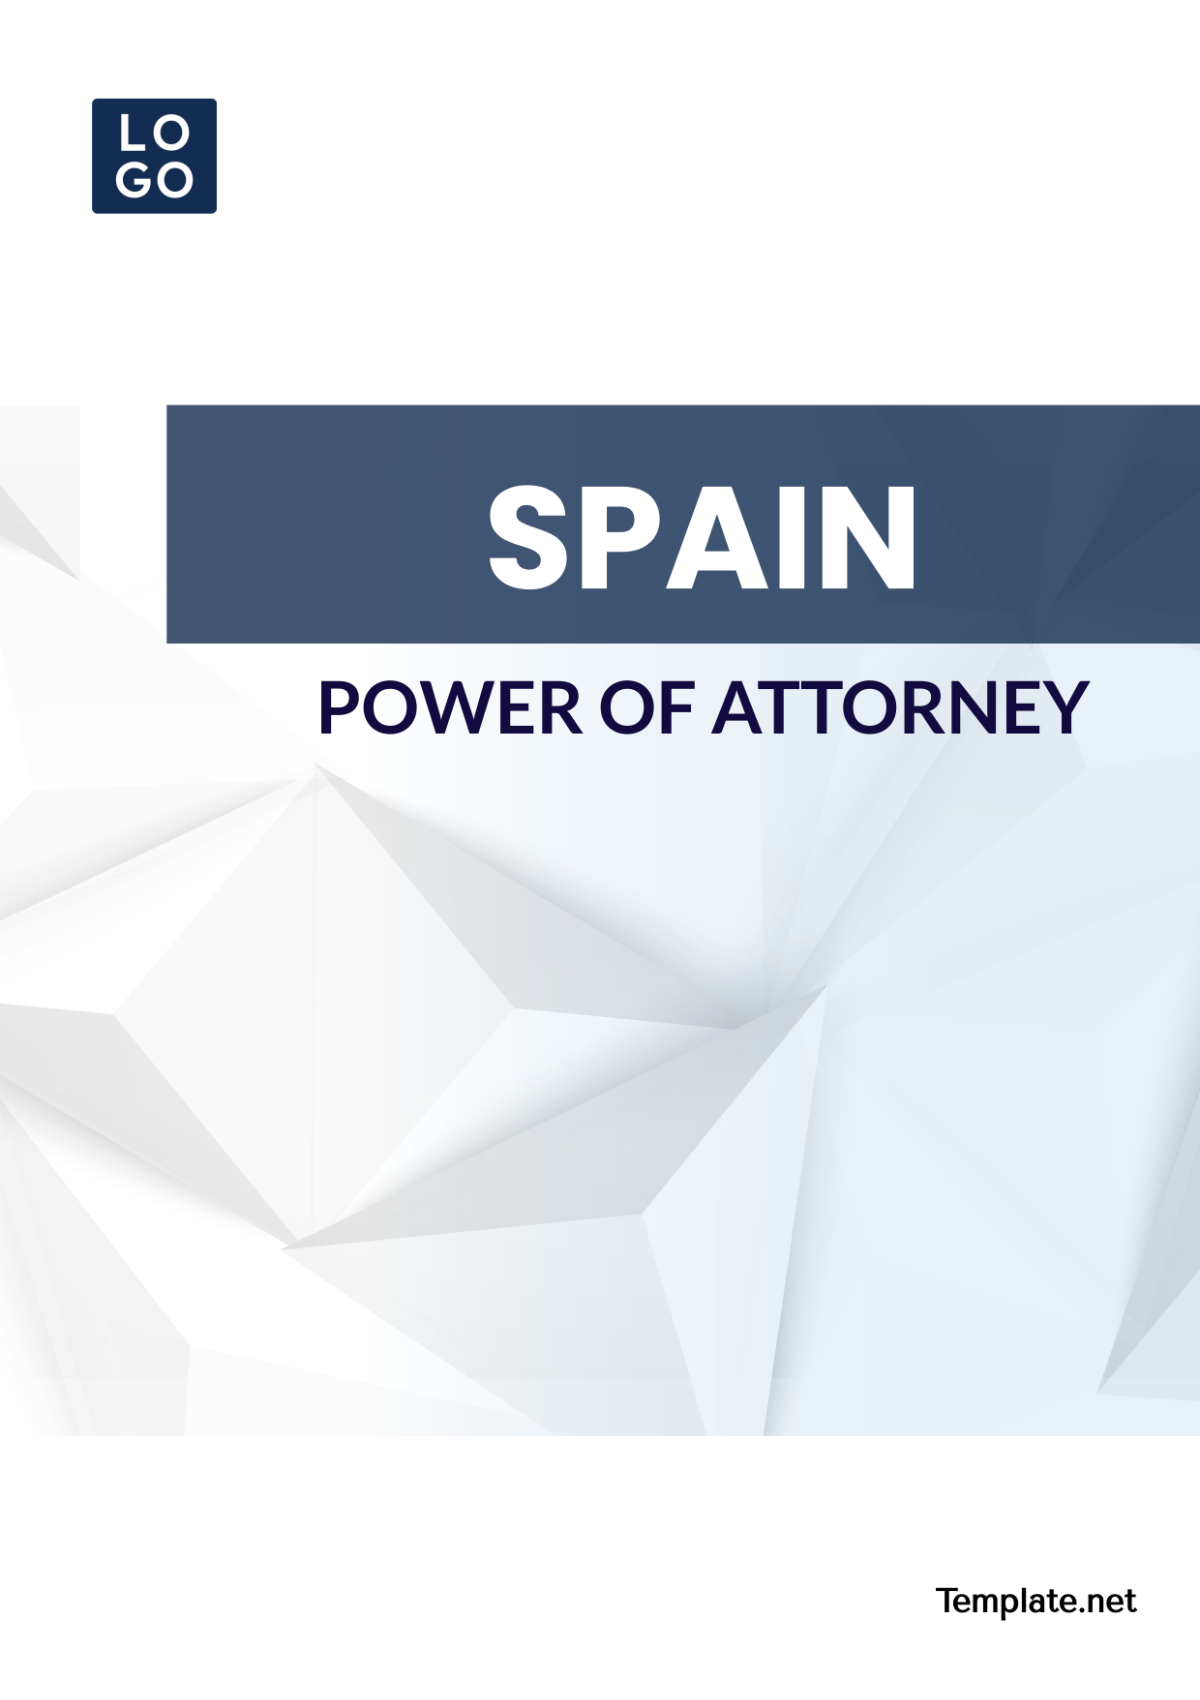 Free Spain Power of Attorney Template